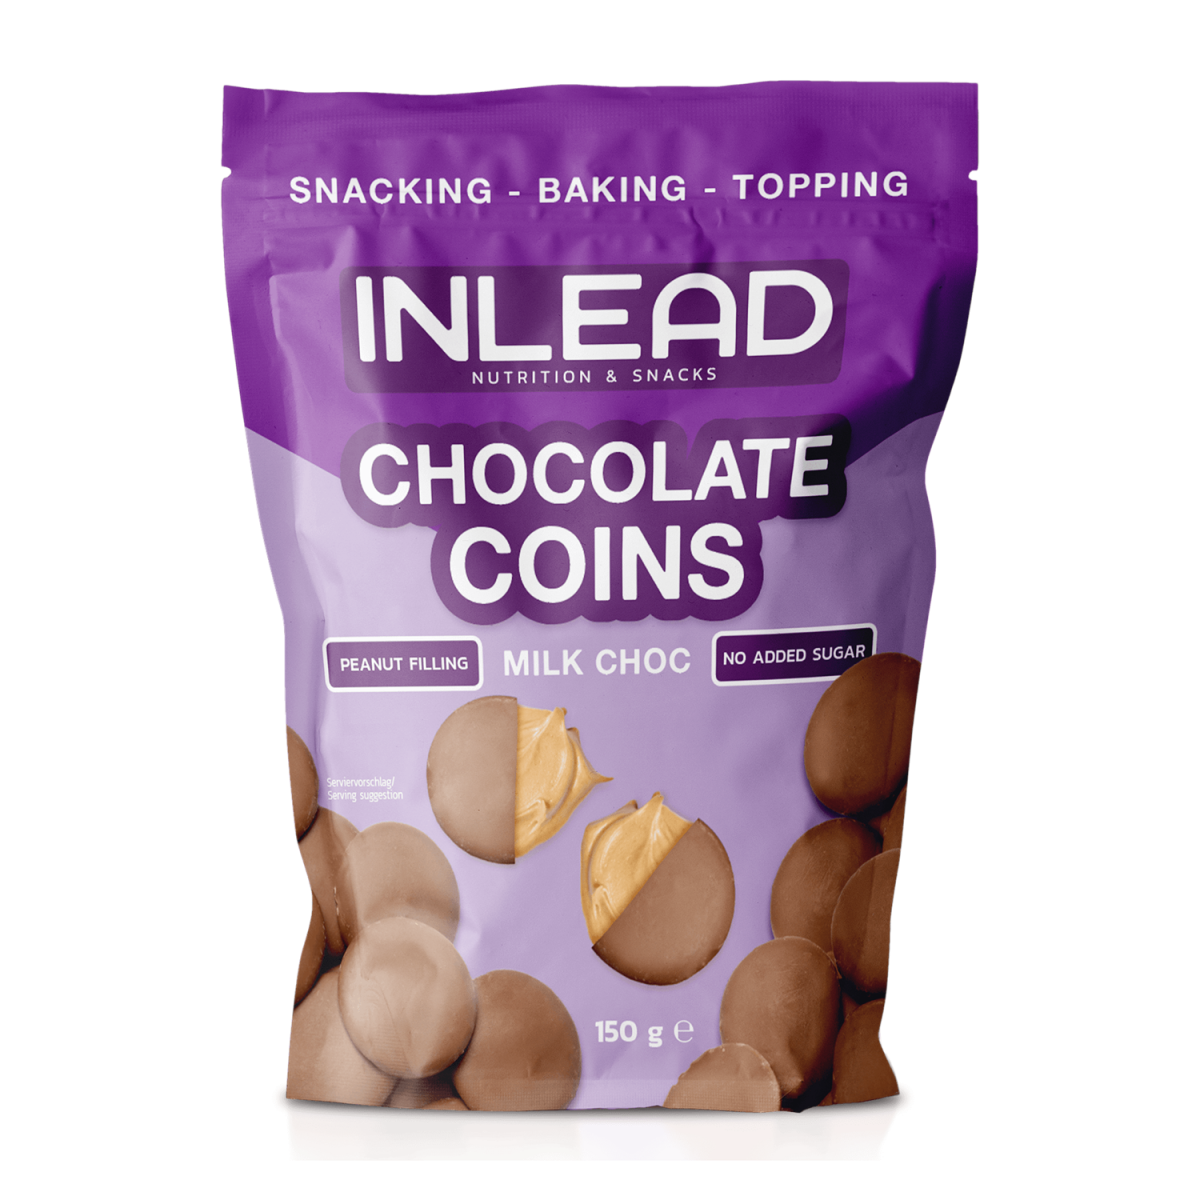 Inlead Chocolate Coins 150g